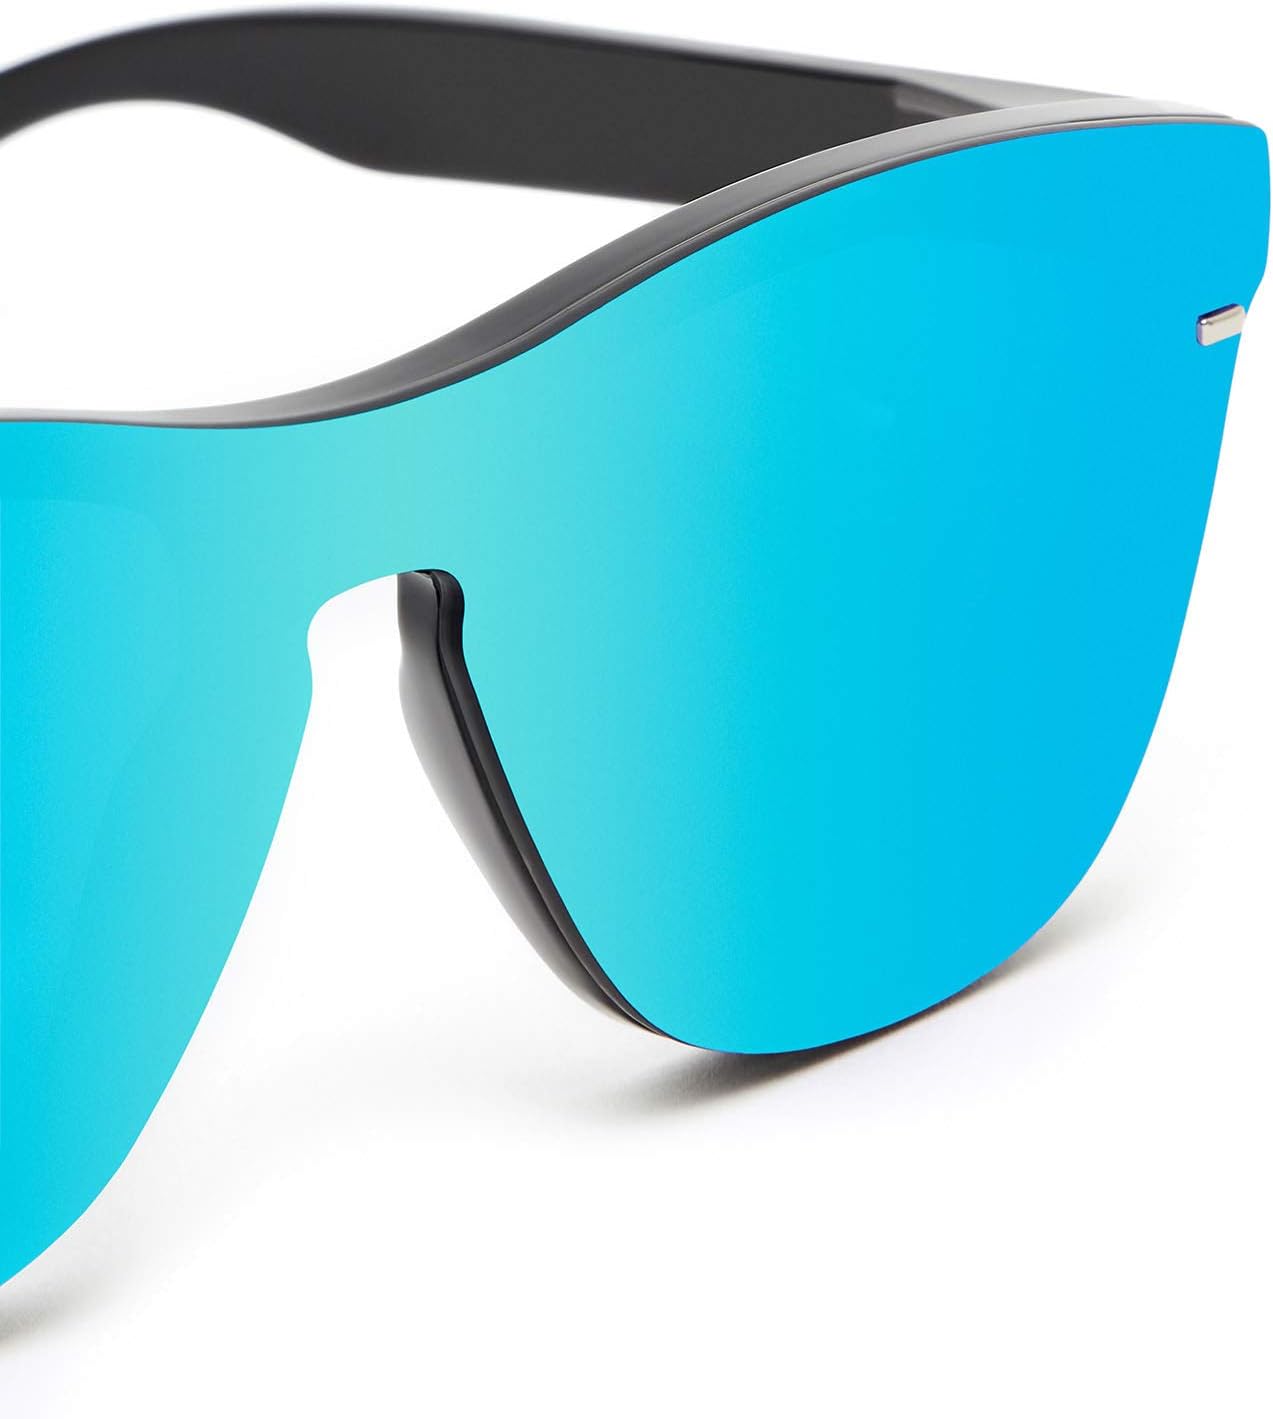 KÍNH MÁT HAWKERS CLEAR BLUE ONE VENM HYBRID SHINY BLACK FRAME AND BLUE SKY MIRRORED MASK LENS 6